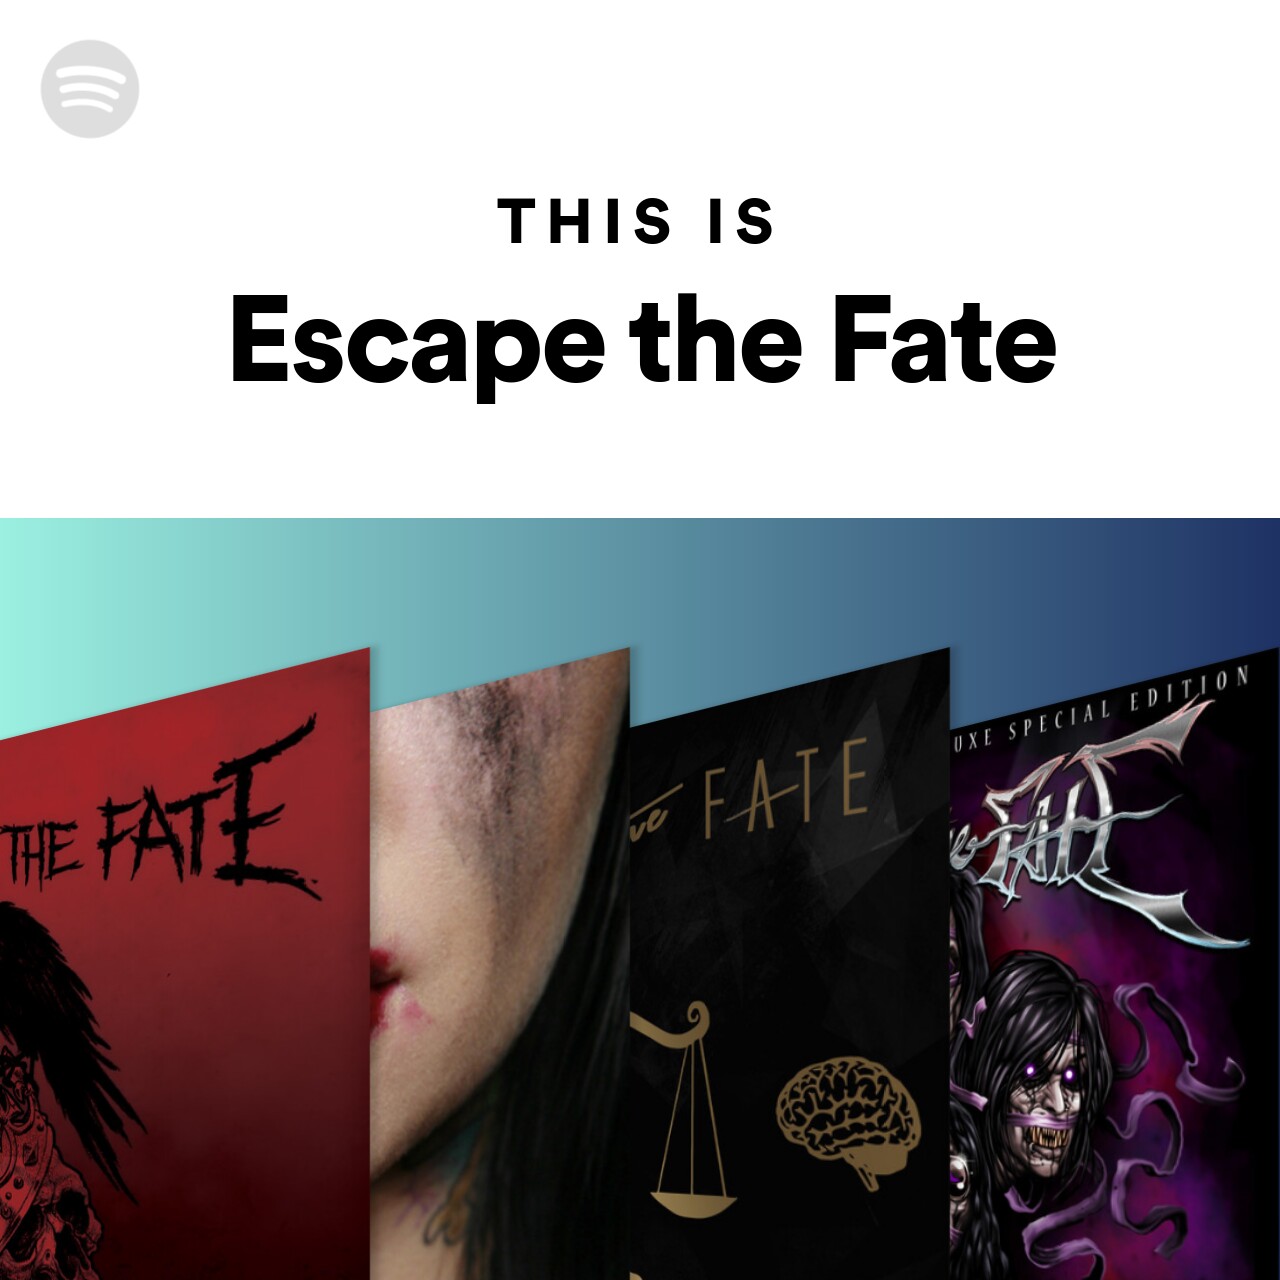 This Is Escape the Fate